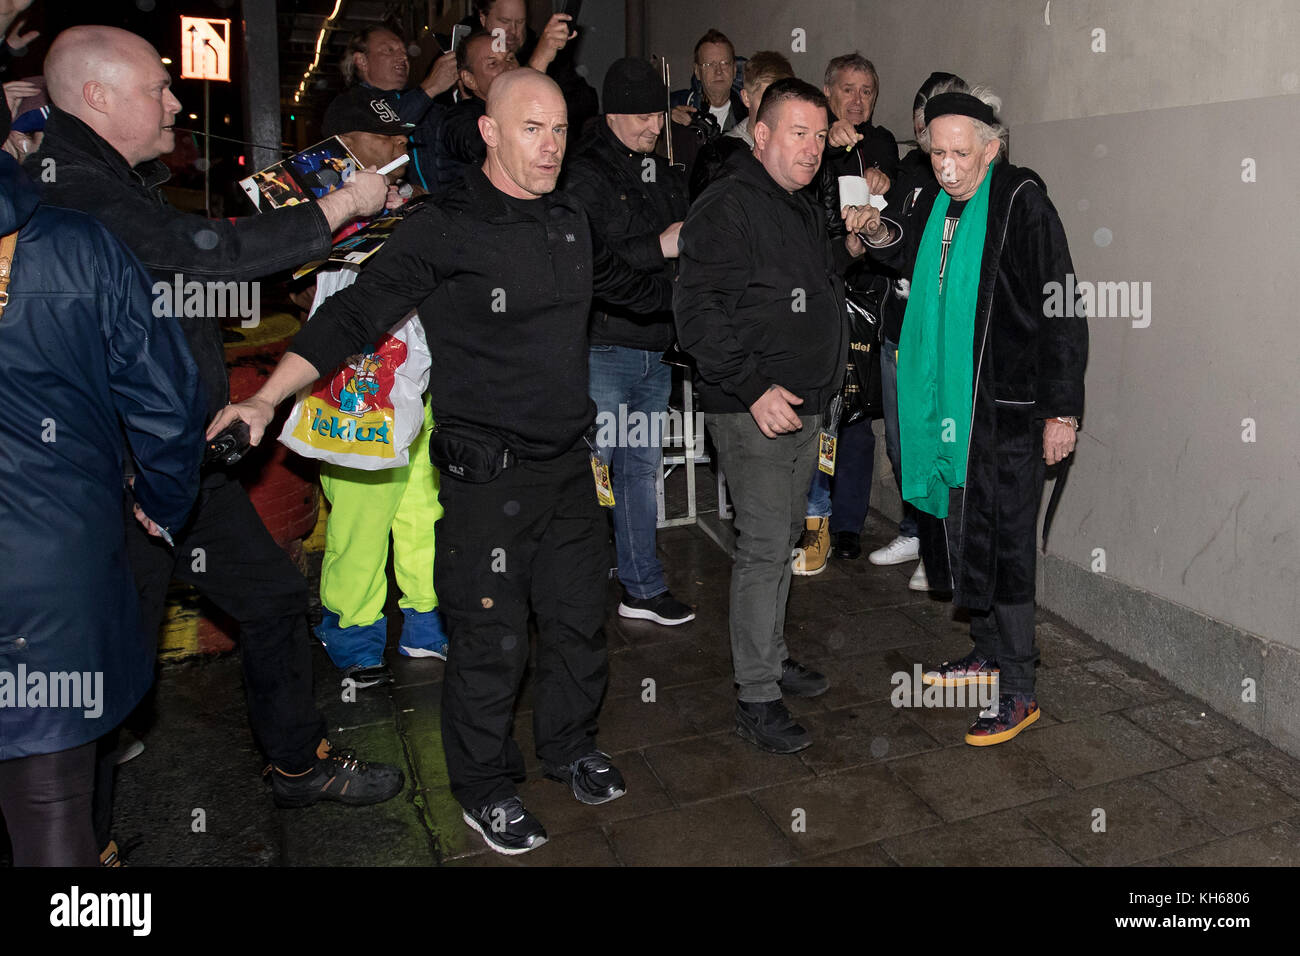 The Rolling Stones arrive at Grand Hotel after a show at Friends Arena  Featuring: Keith Richards Where: Stockholm, Sweden When: 12 Oct 2017  Credit: Emelie Andersson/WENN.com Stock Photo - Alamy